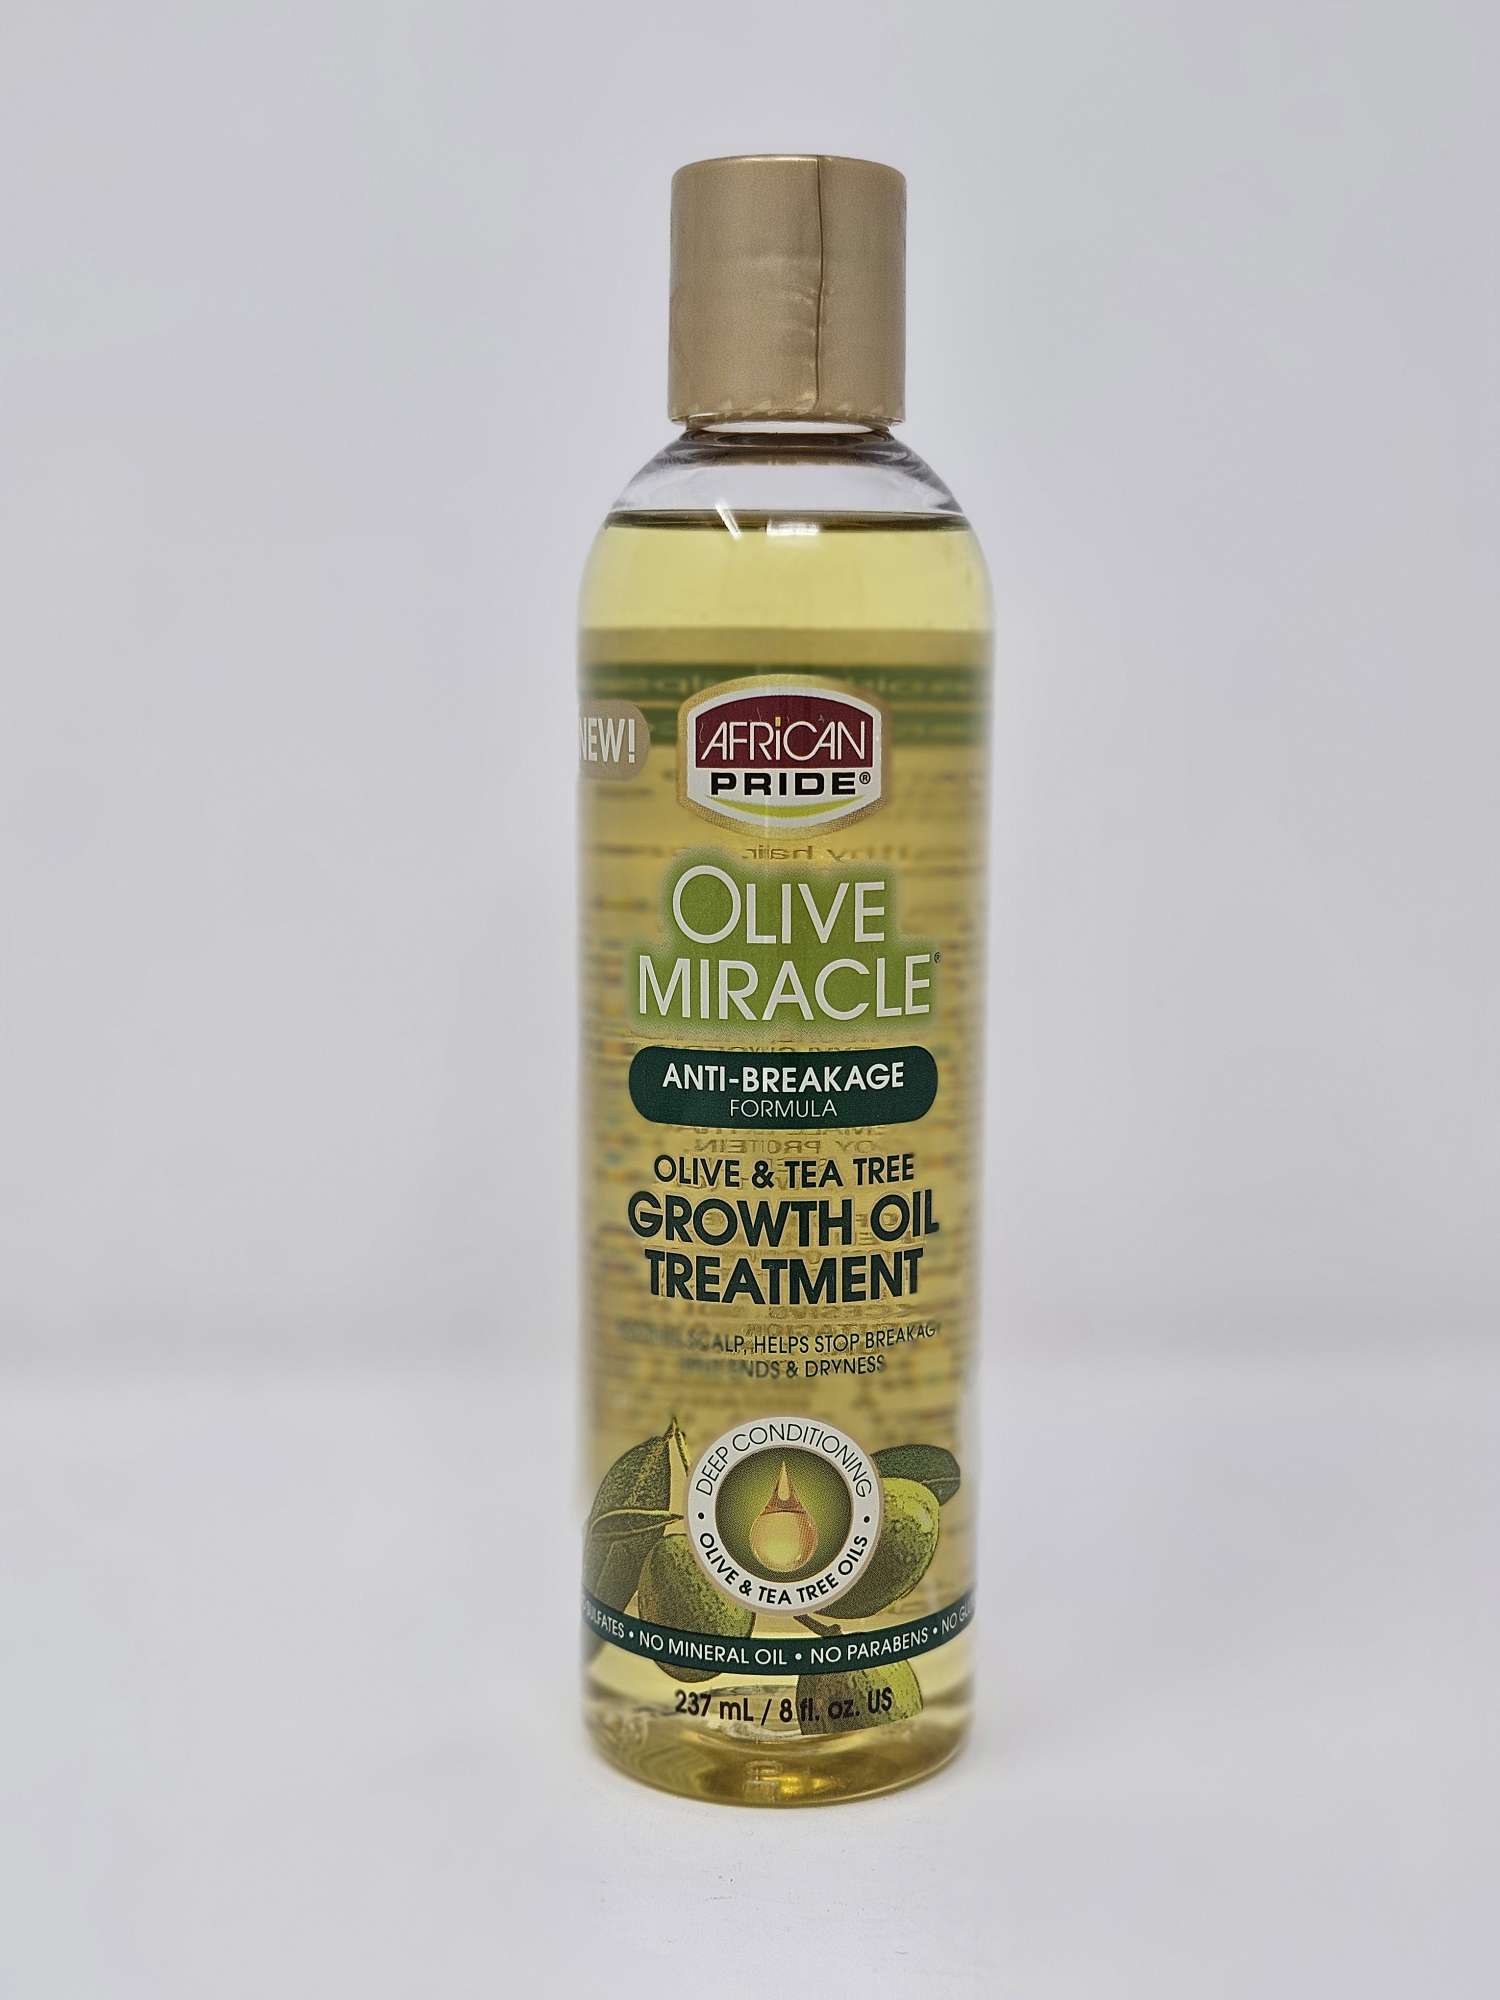 African Pride Olive Miracle Olive & Tea Tree Growth Oil Treatment - 8oz